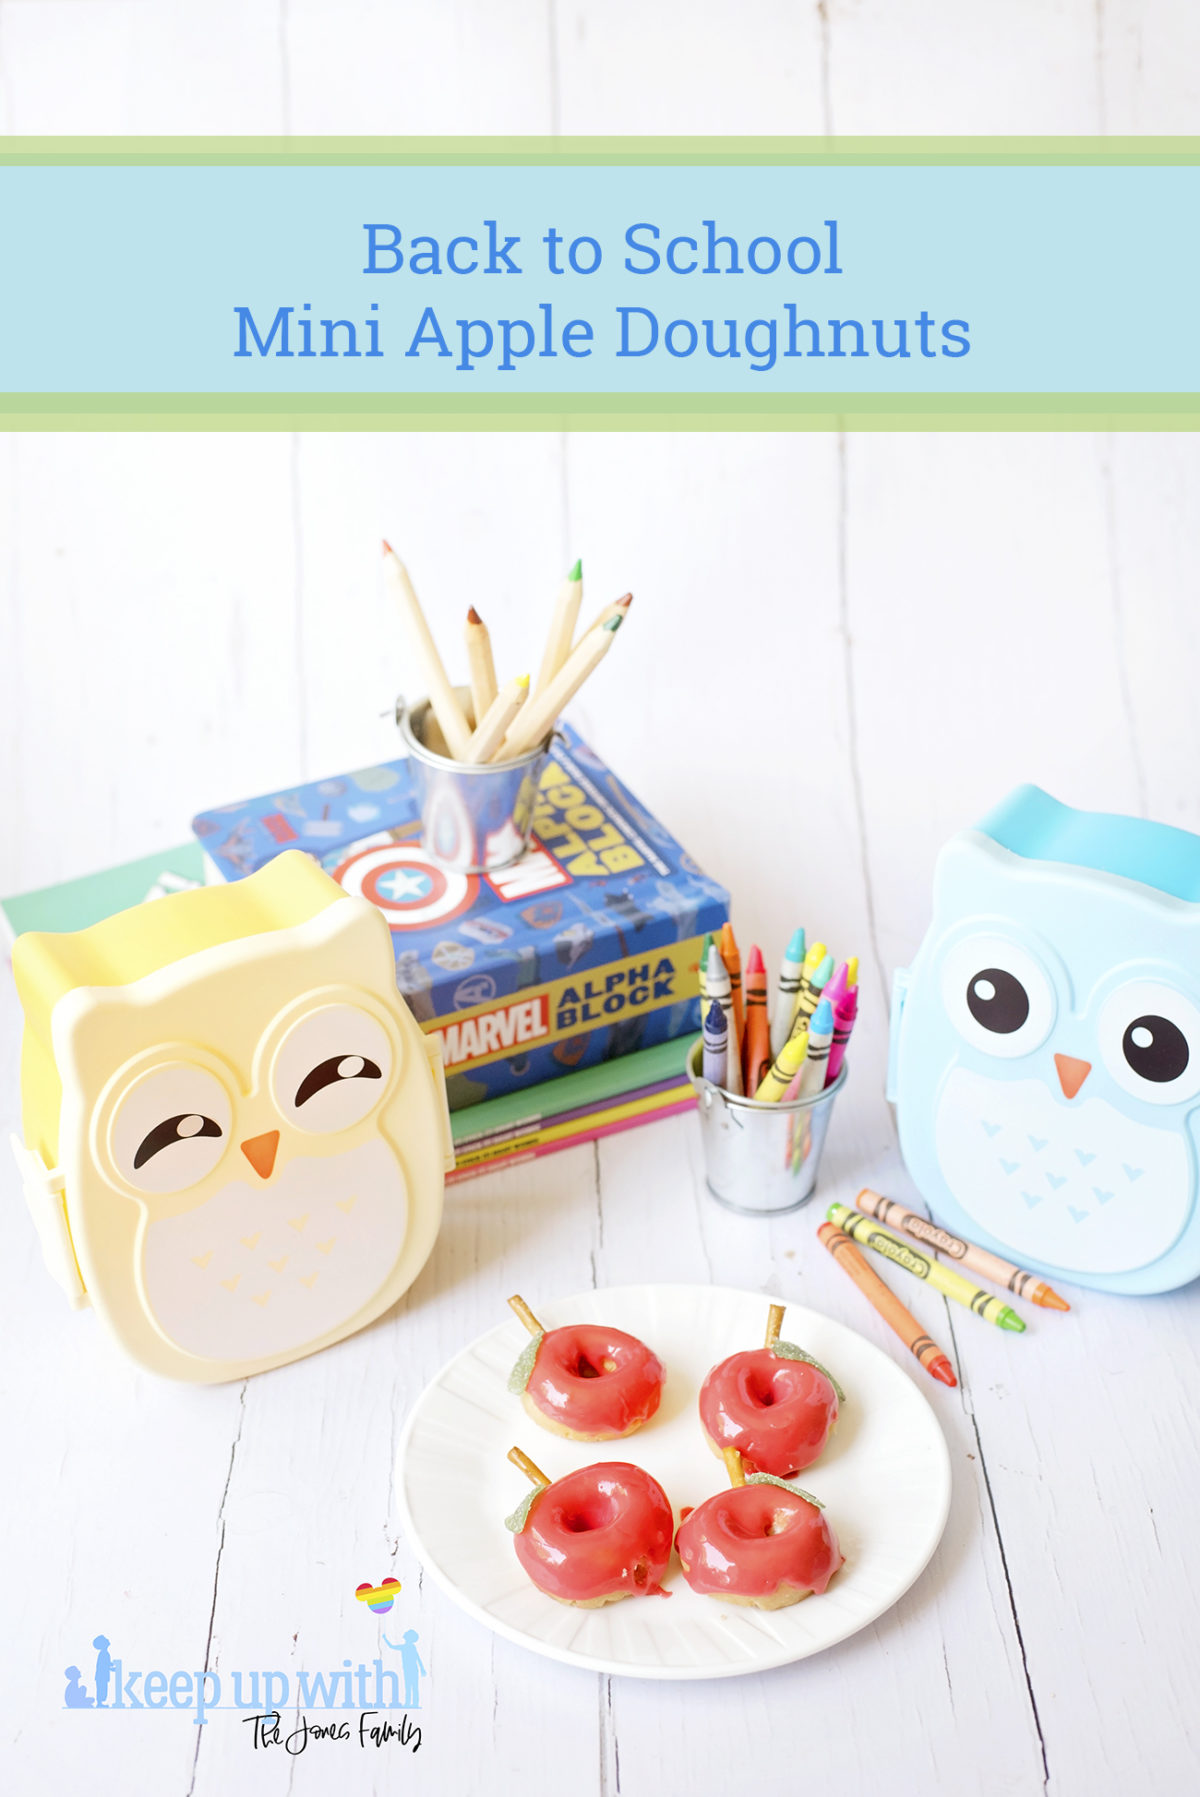 Image shows red apple shaped Back to School Doughnuts on a white Vera Wang plate, sitting on a white wooden surface. There are two small owl shaped bento boxes and books in the background, along with a bucket of crayola crayons. Image by Sara-Jayne from Keep Up With The Jones Family.